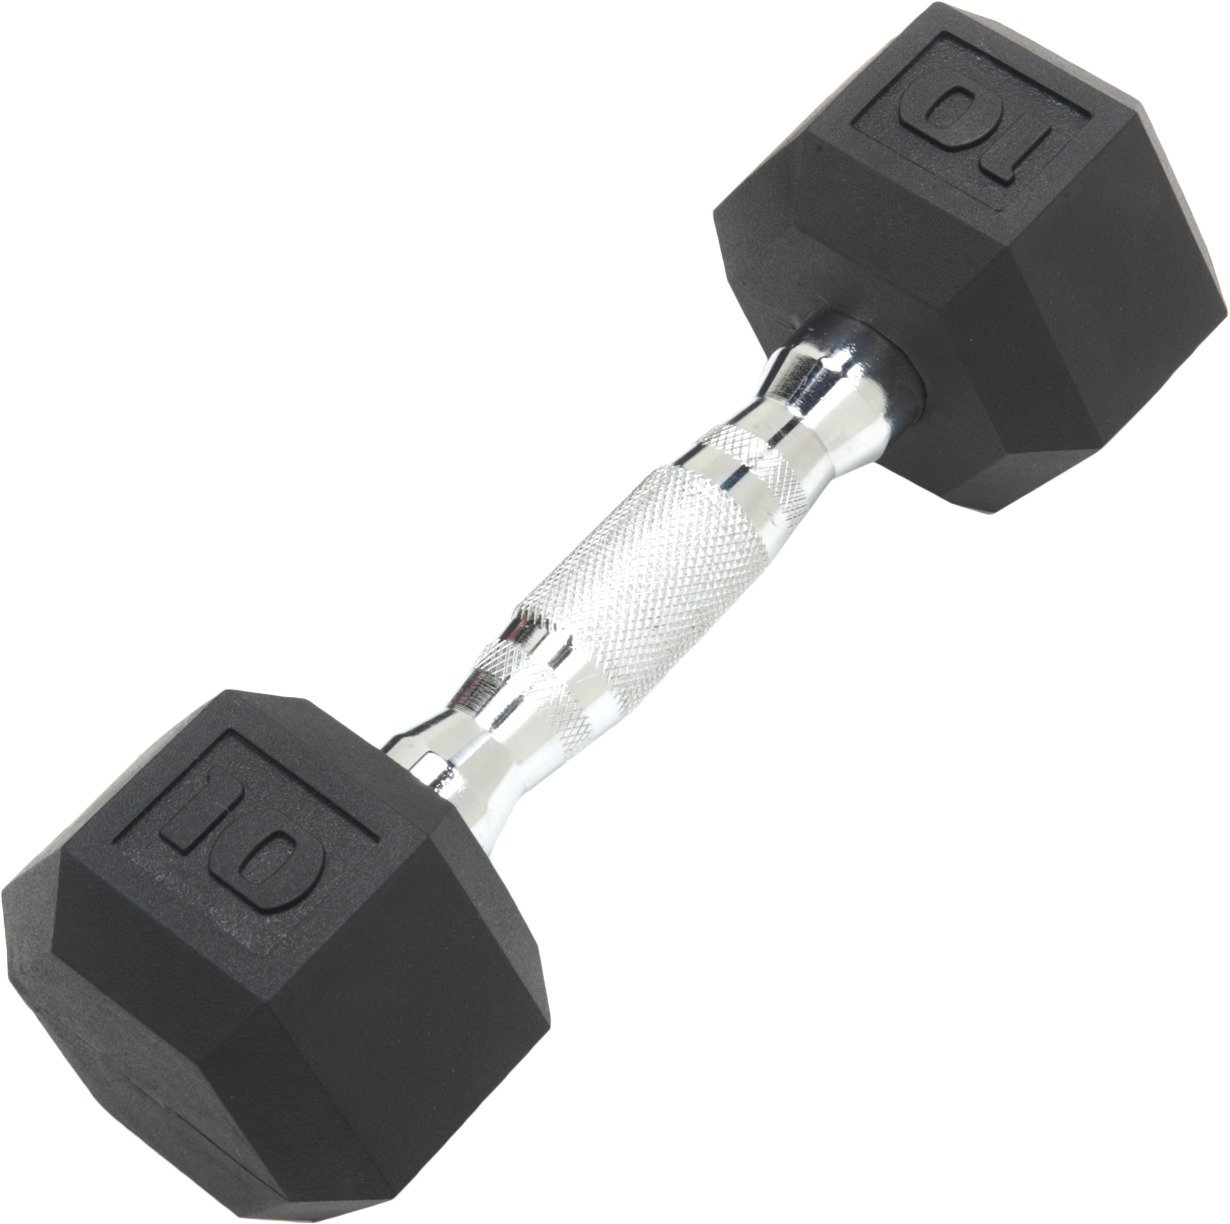 10 Pound Dumbbell Workout | tunersread.com